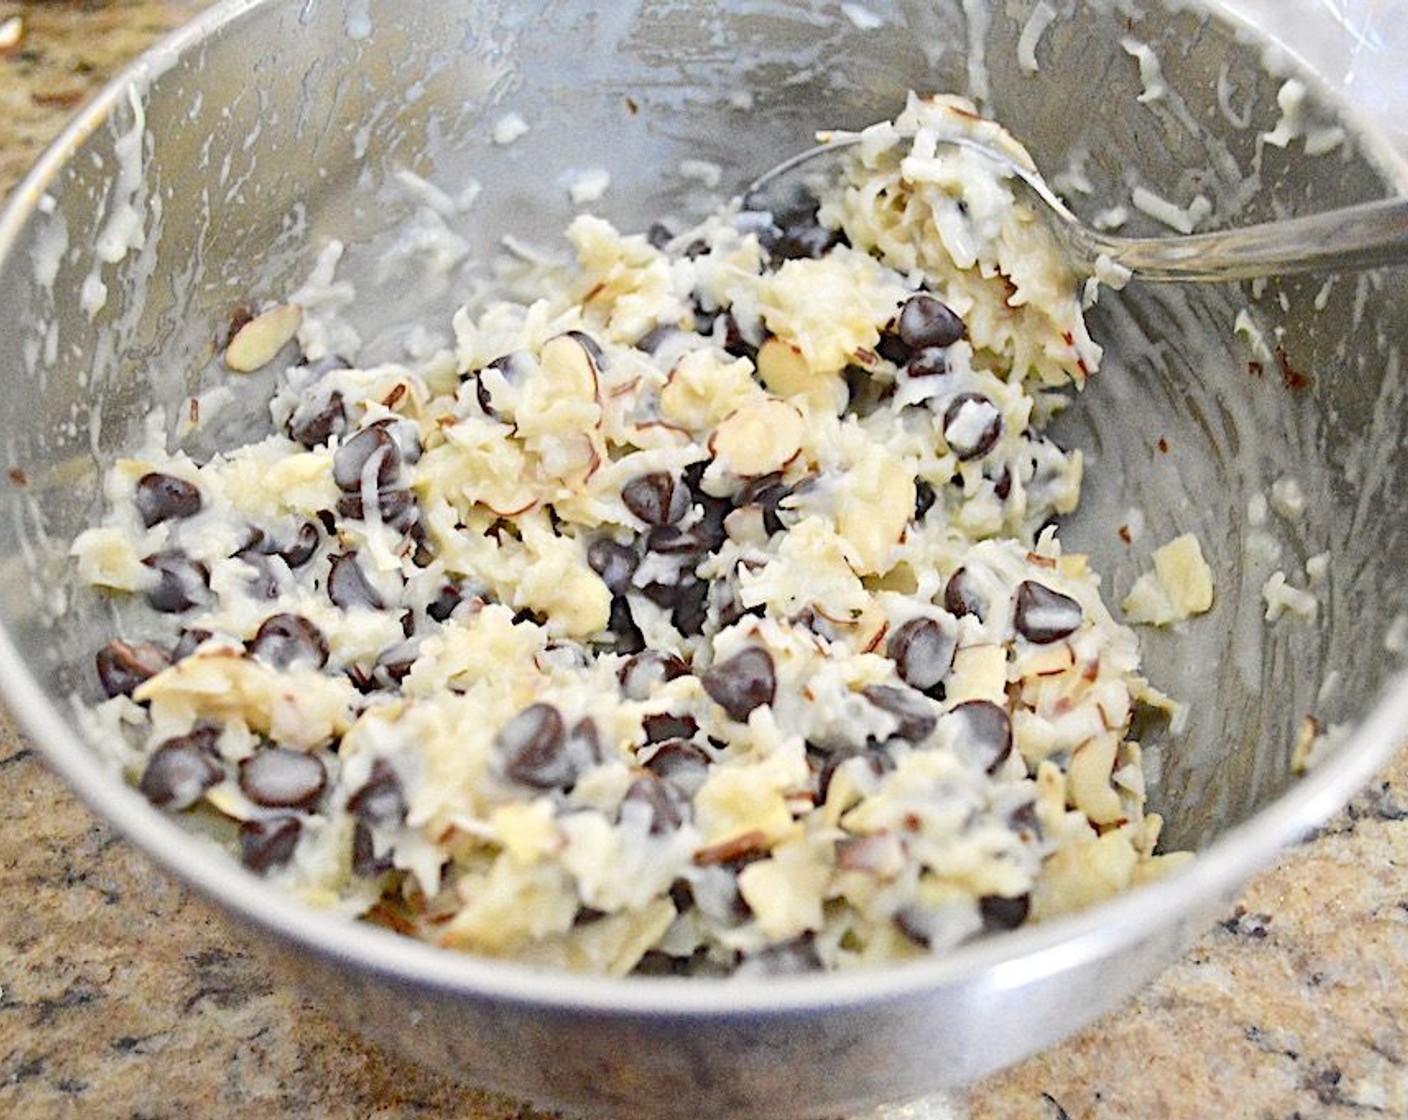 step 2 Combine the Unsweetened Coconut Flakes (1 1/2 cups), Semi-Sweet Chocolate Chips (1 cup), Sliced Almonds (1/2 cup), and Almond Extract (1/4 tsp) in a large mixing bowl and stir them together. Then pour in the Sweetened Condensed Milk (1 cup) and stir thoroughly so that the milk coats everything.